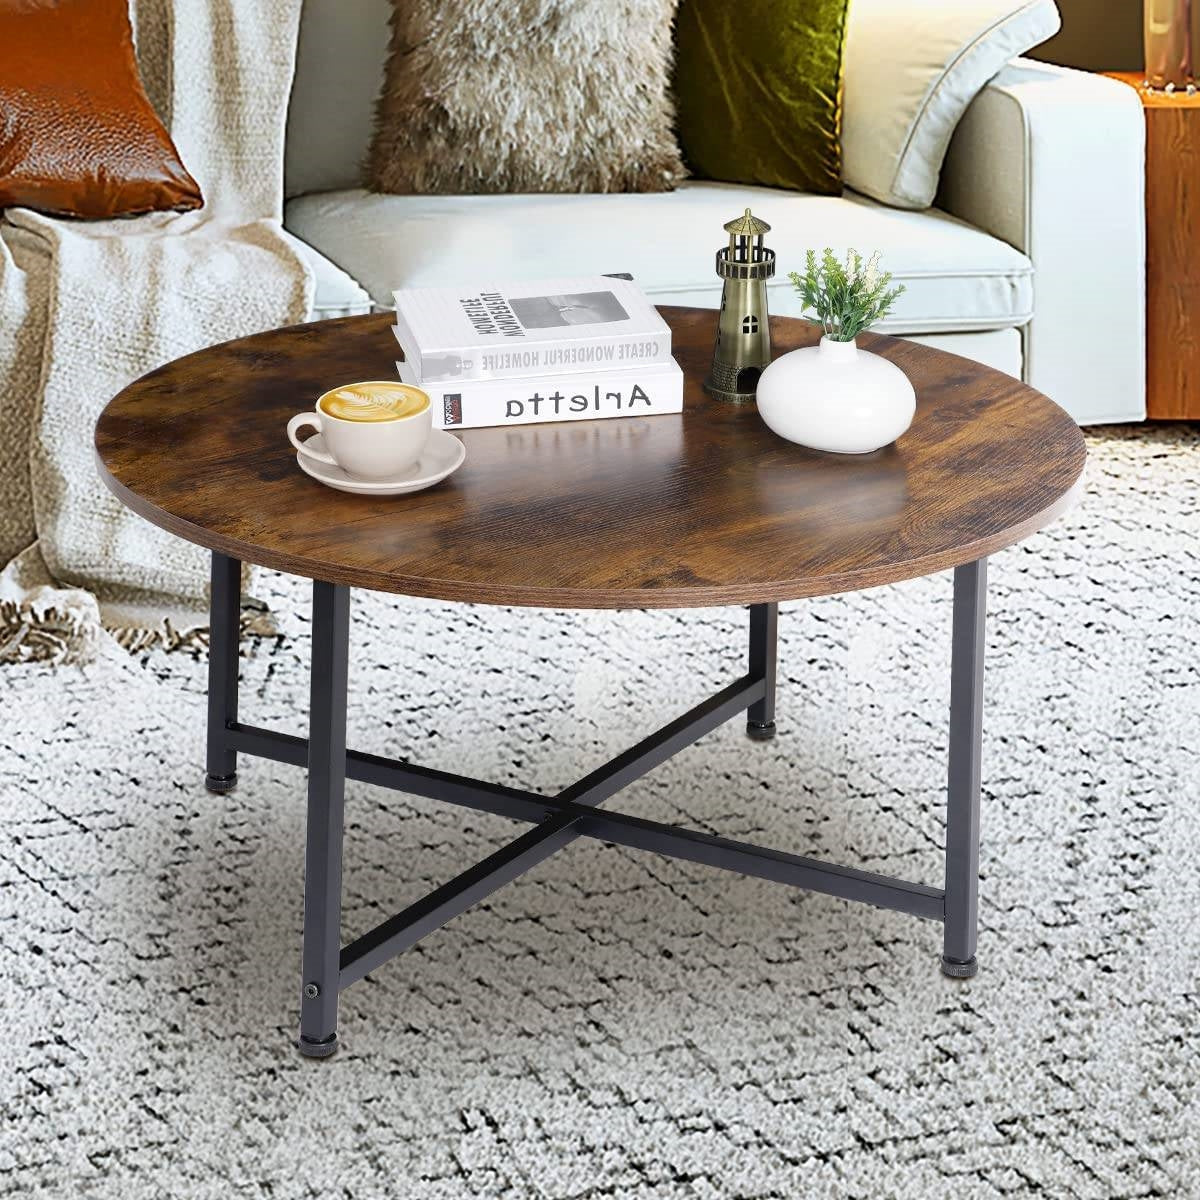 Living Room > Coffee Tables - Modern Round Industrial Coffee Table With Rustic Brown Wood Top